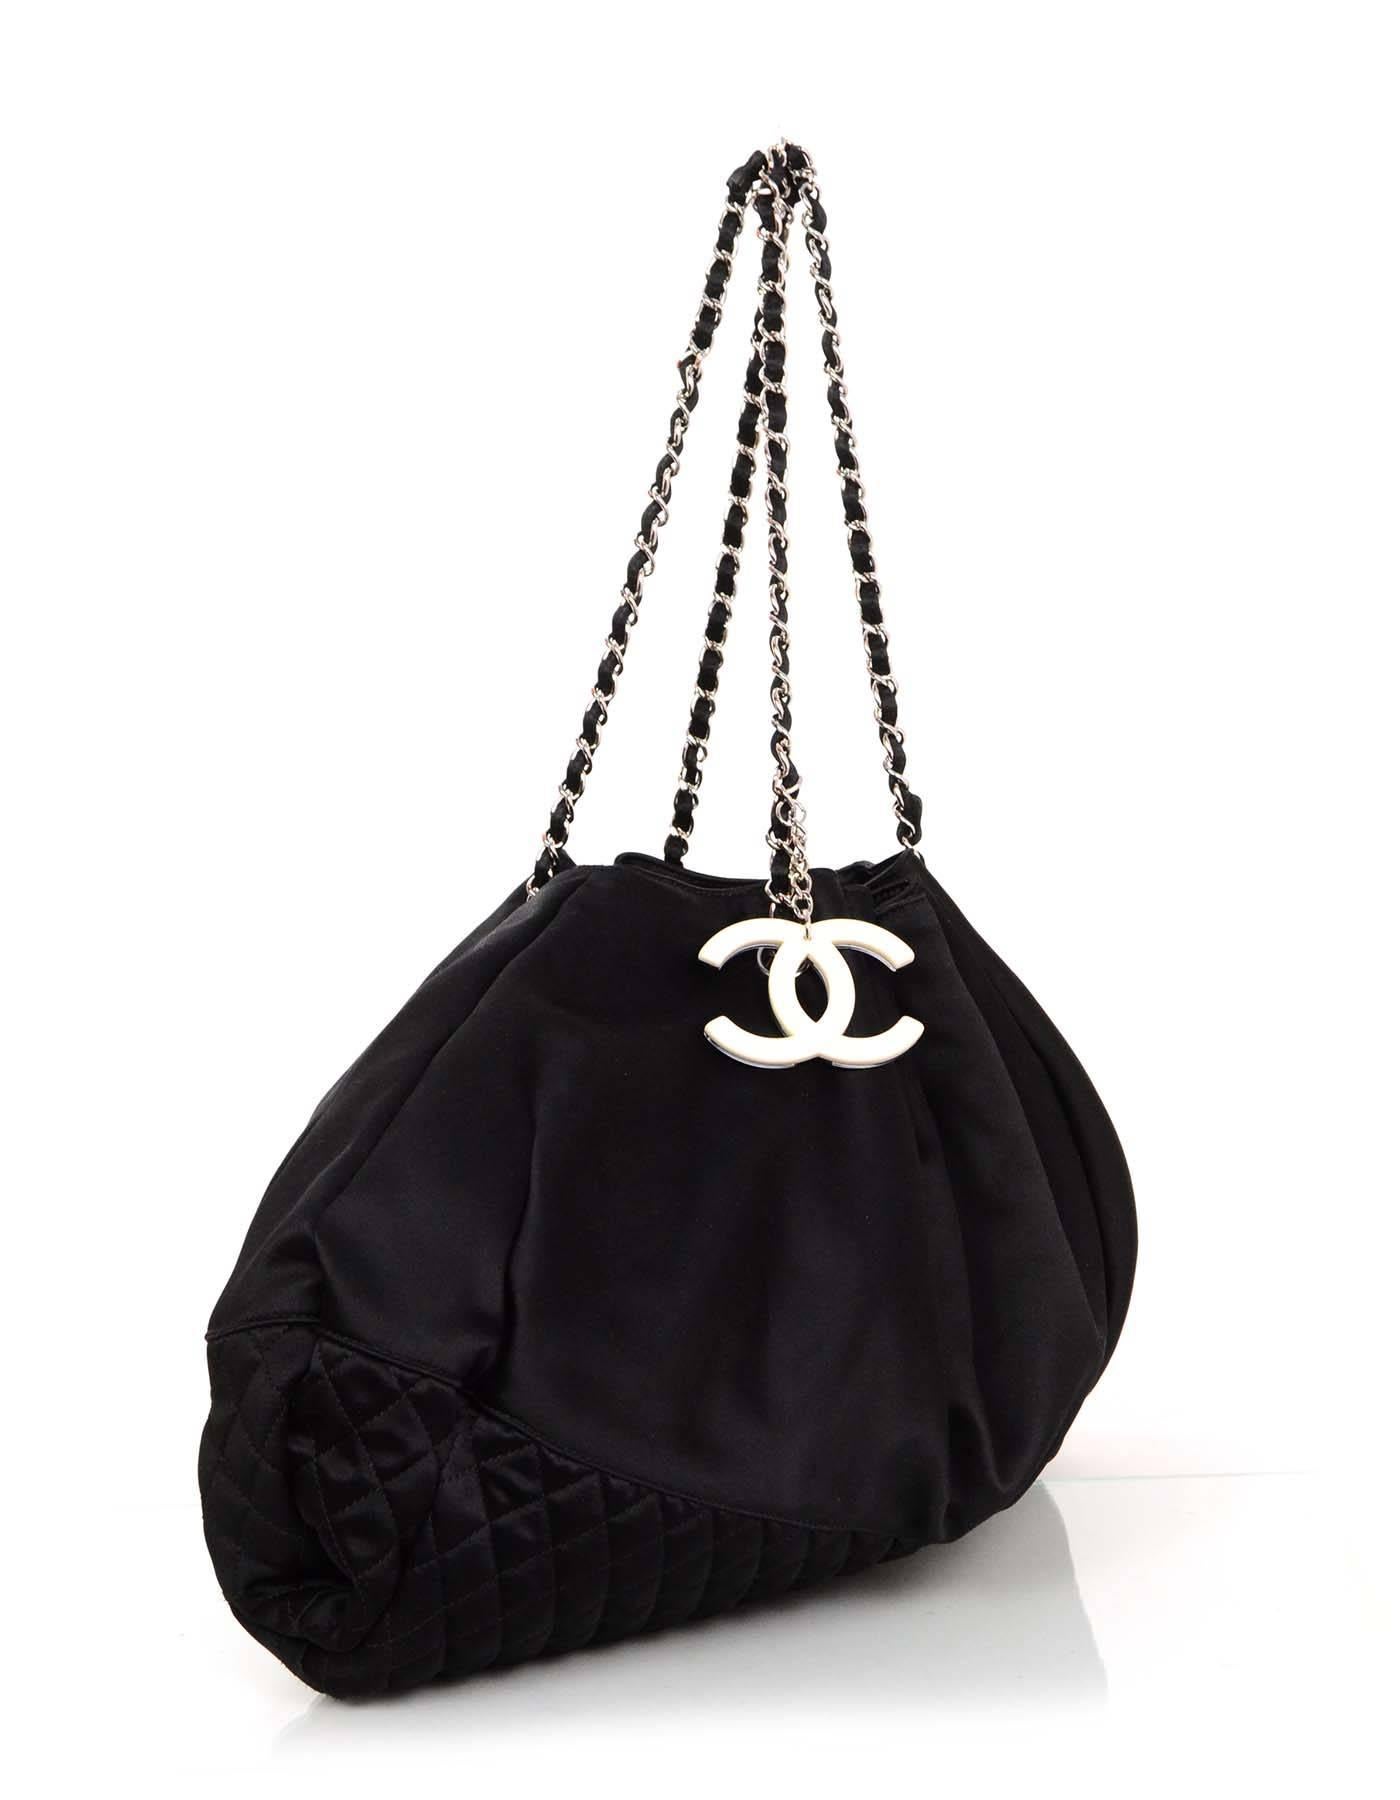 100% Authentic Chanel Black Satin Melrose Cabas Tote. Features bottom border quilting and satin laced classic chain straps. Black and ivory resin CC charm attached to front strap of bag.

Made In: Italy
Year of Production: 2008
Color: